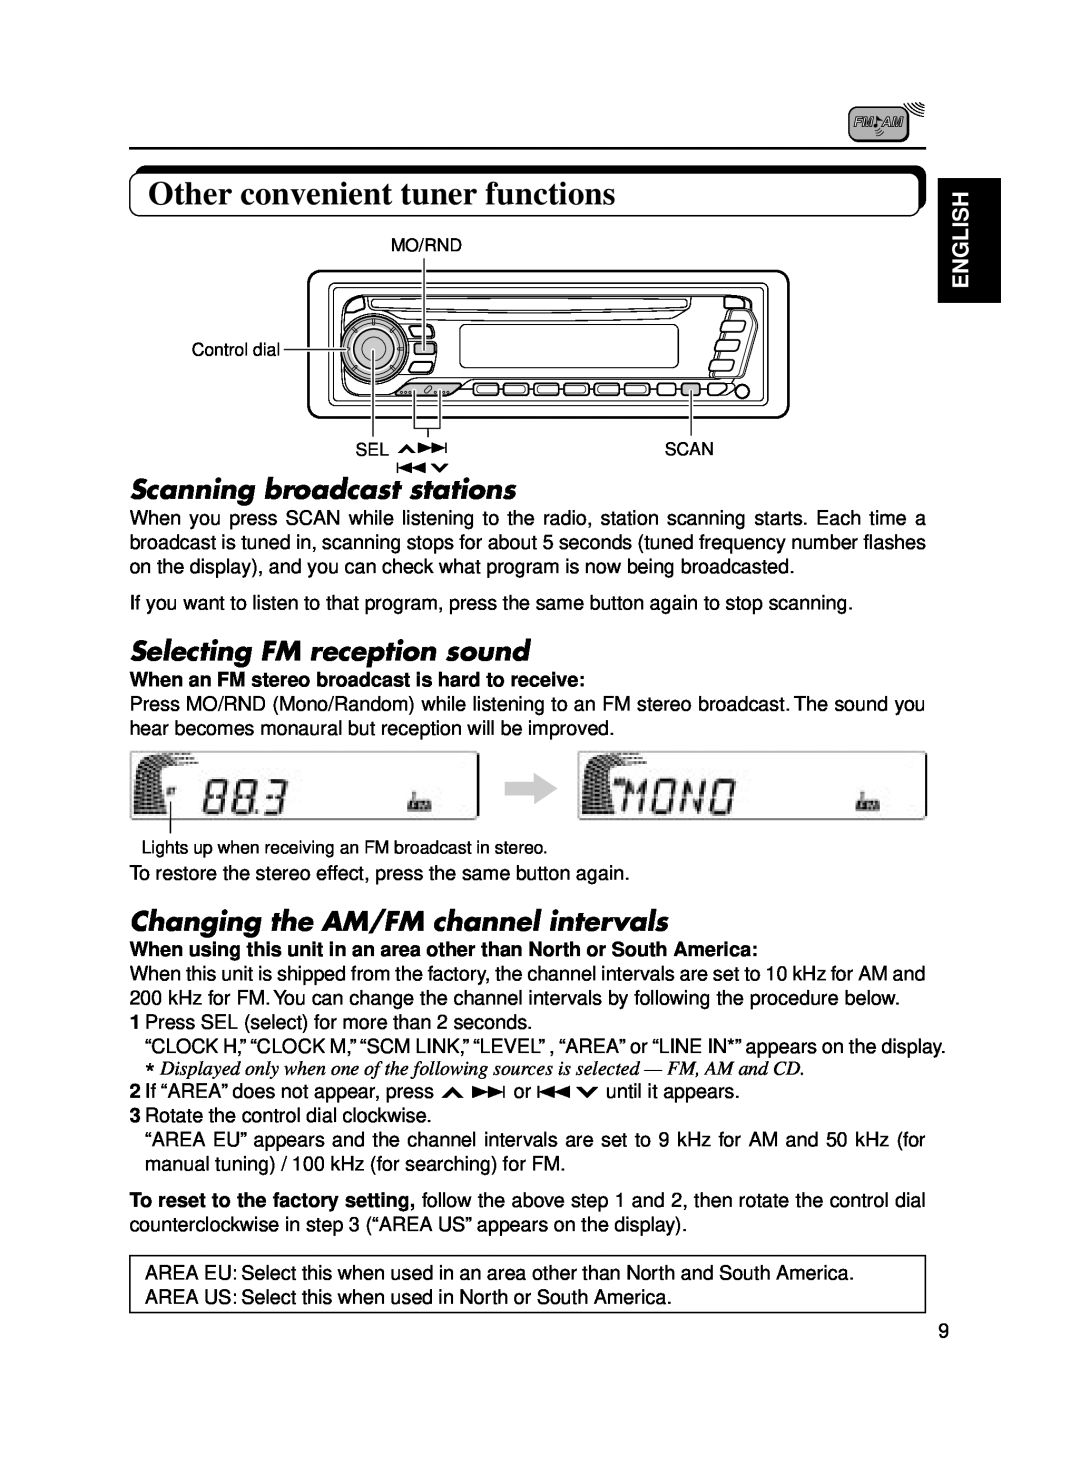 JVC KD-SX650 manual Other convenient tuner functions, Scanning broadcast stations, Selecting FM reception sound, English 